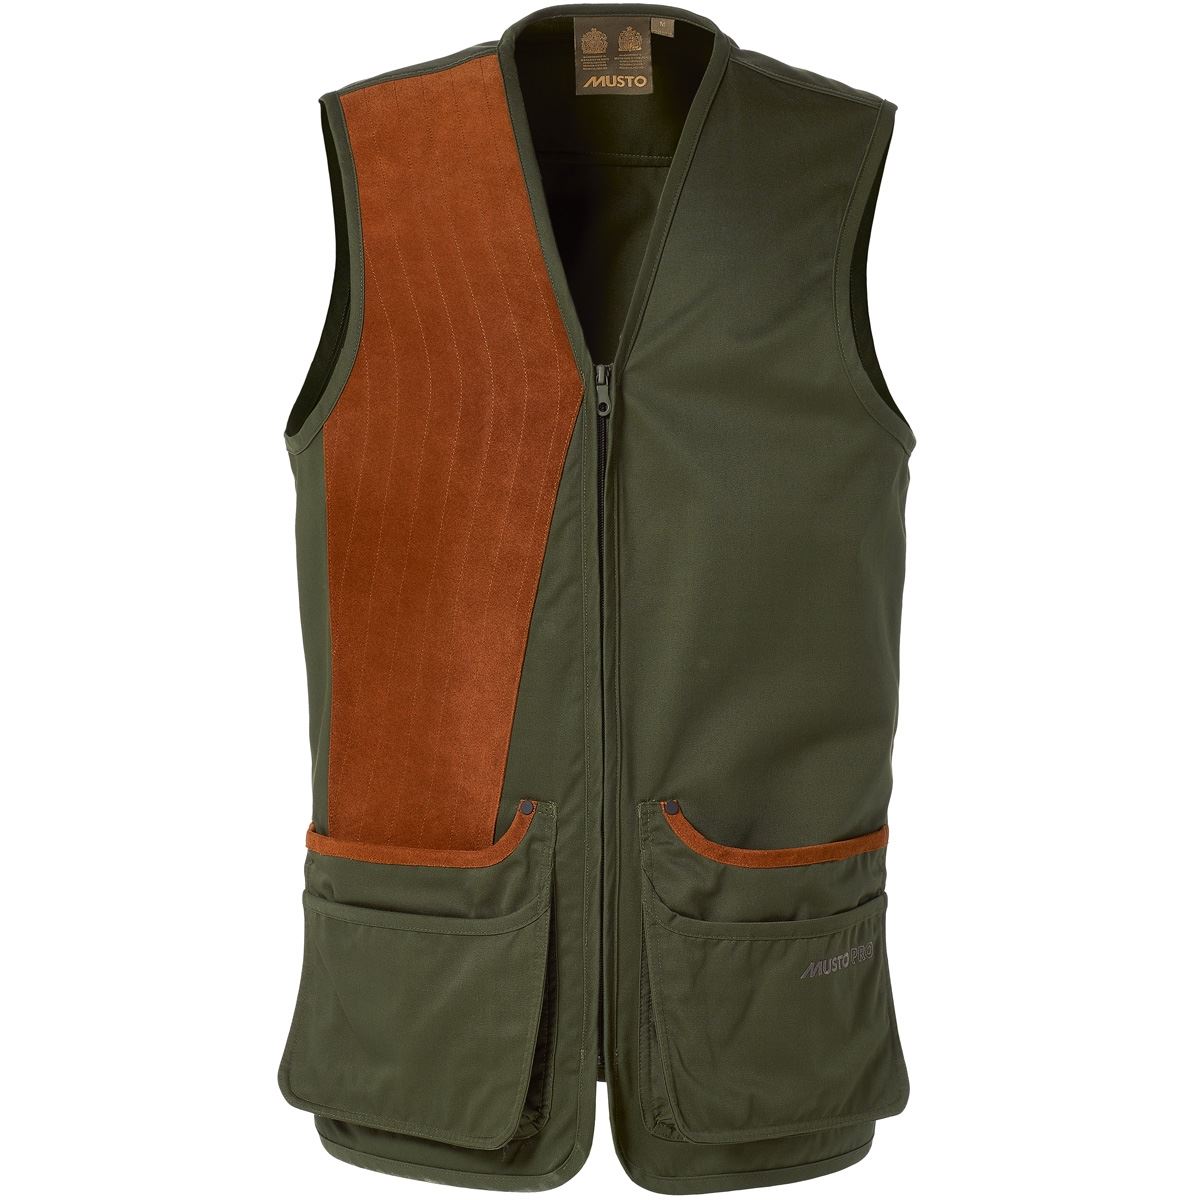 What are the key attributes of the Musto shooting vest for clay shooting?